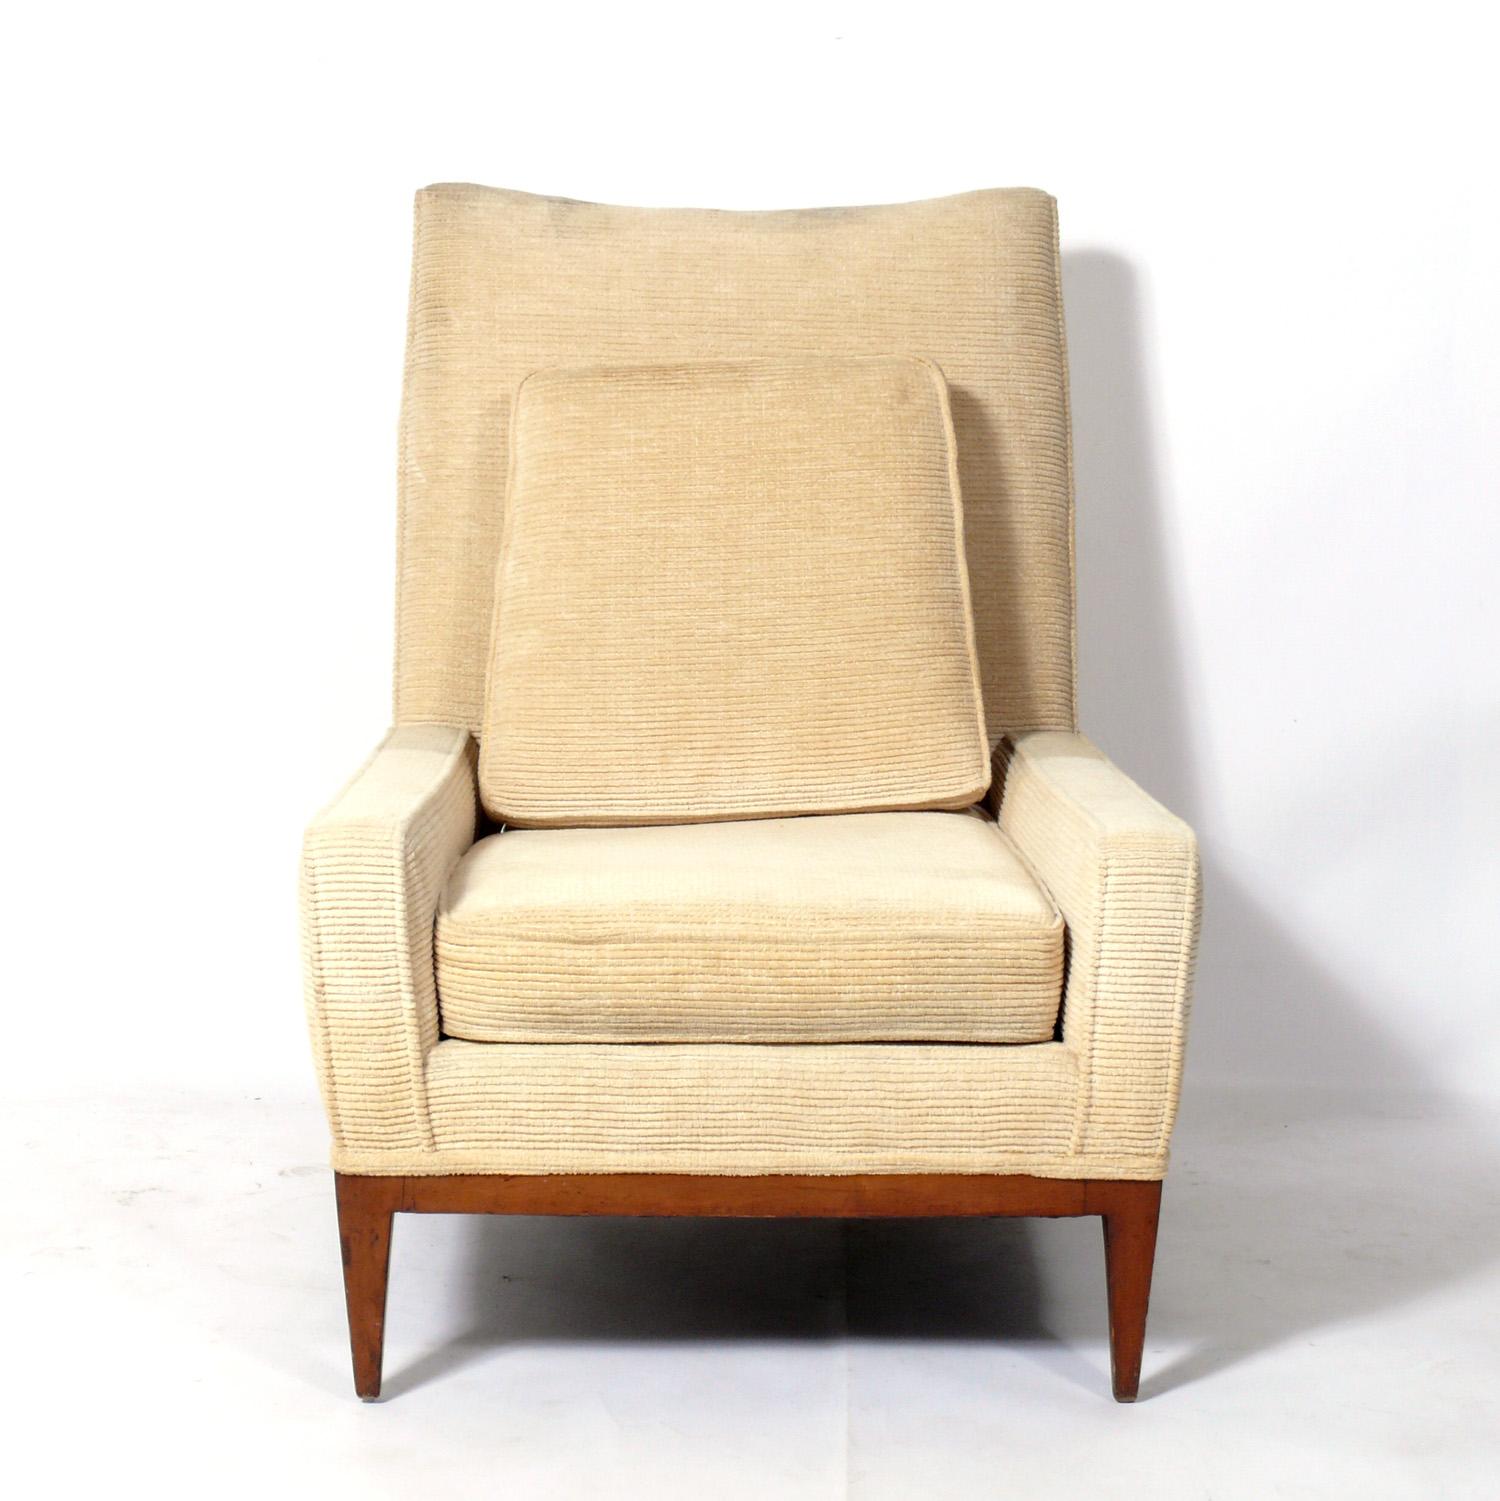 Mid-Century Modern Lounge Chair, designed by Paul McCobb, American, circa 1950s. This chair is currently being refinished and reupholstered and can be completed in your choice of finish color and in your fabric. Simply ship us seven yards of your